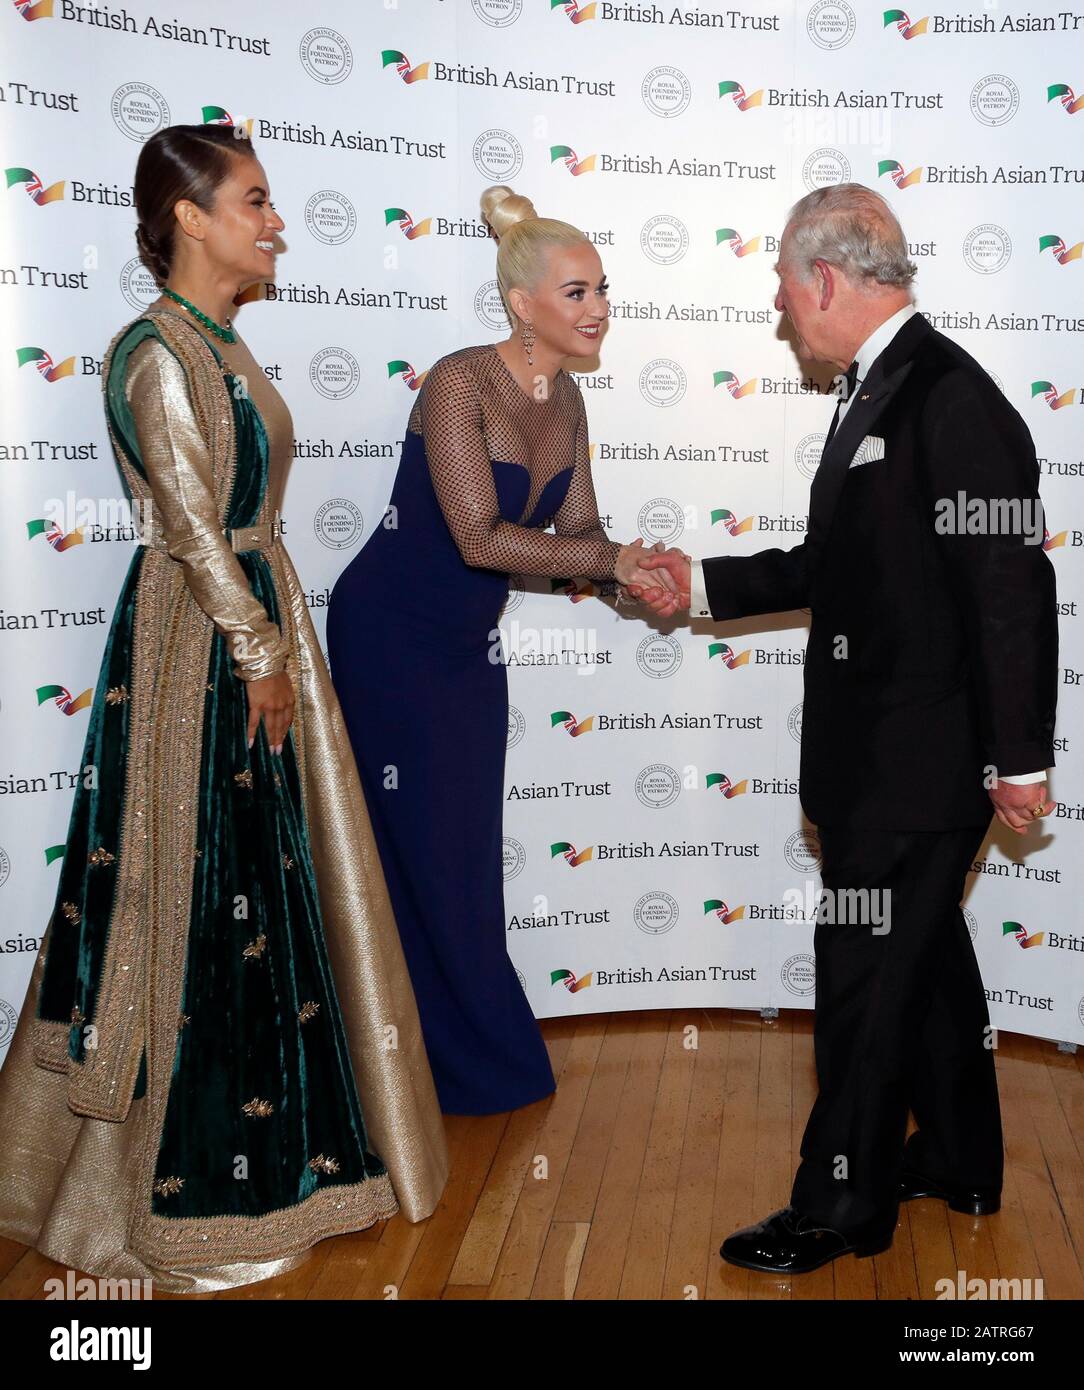 The Prince of Wales meets Indian businesswoman Natasha Poonawalla (left) and musician Katy Perry (centre left), as he attends a reception with the Duchess of Cornwall for supporters of the British Asian Trust at Banqueting House, Whitehall, London. Stock Photo